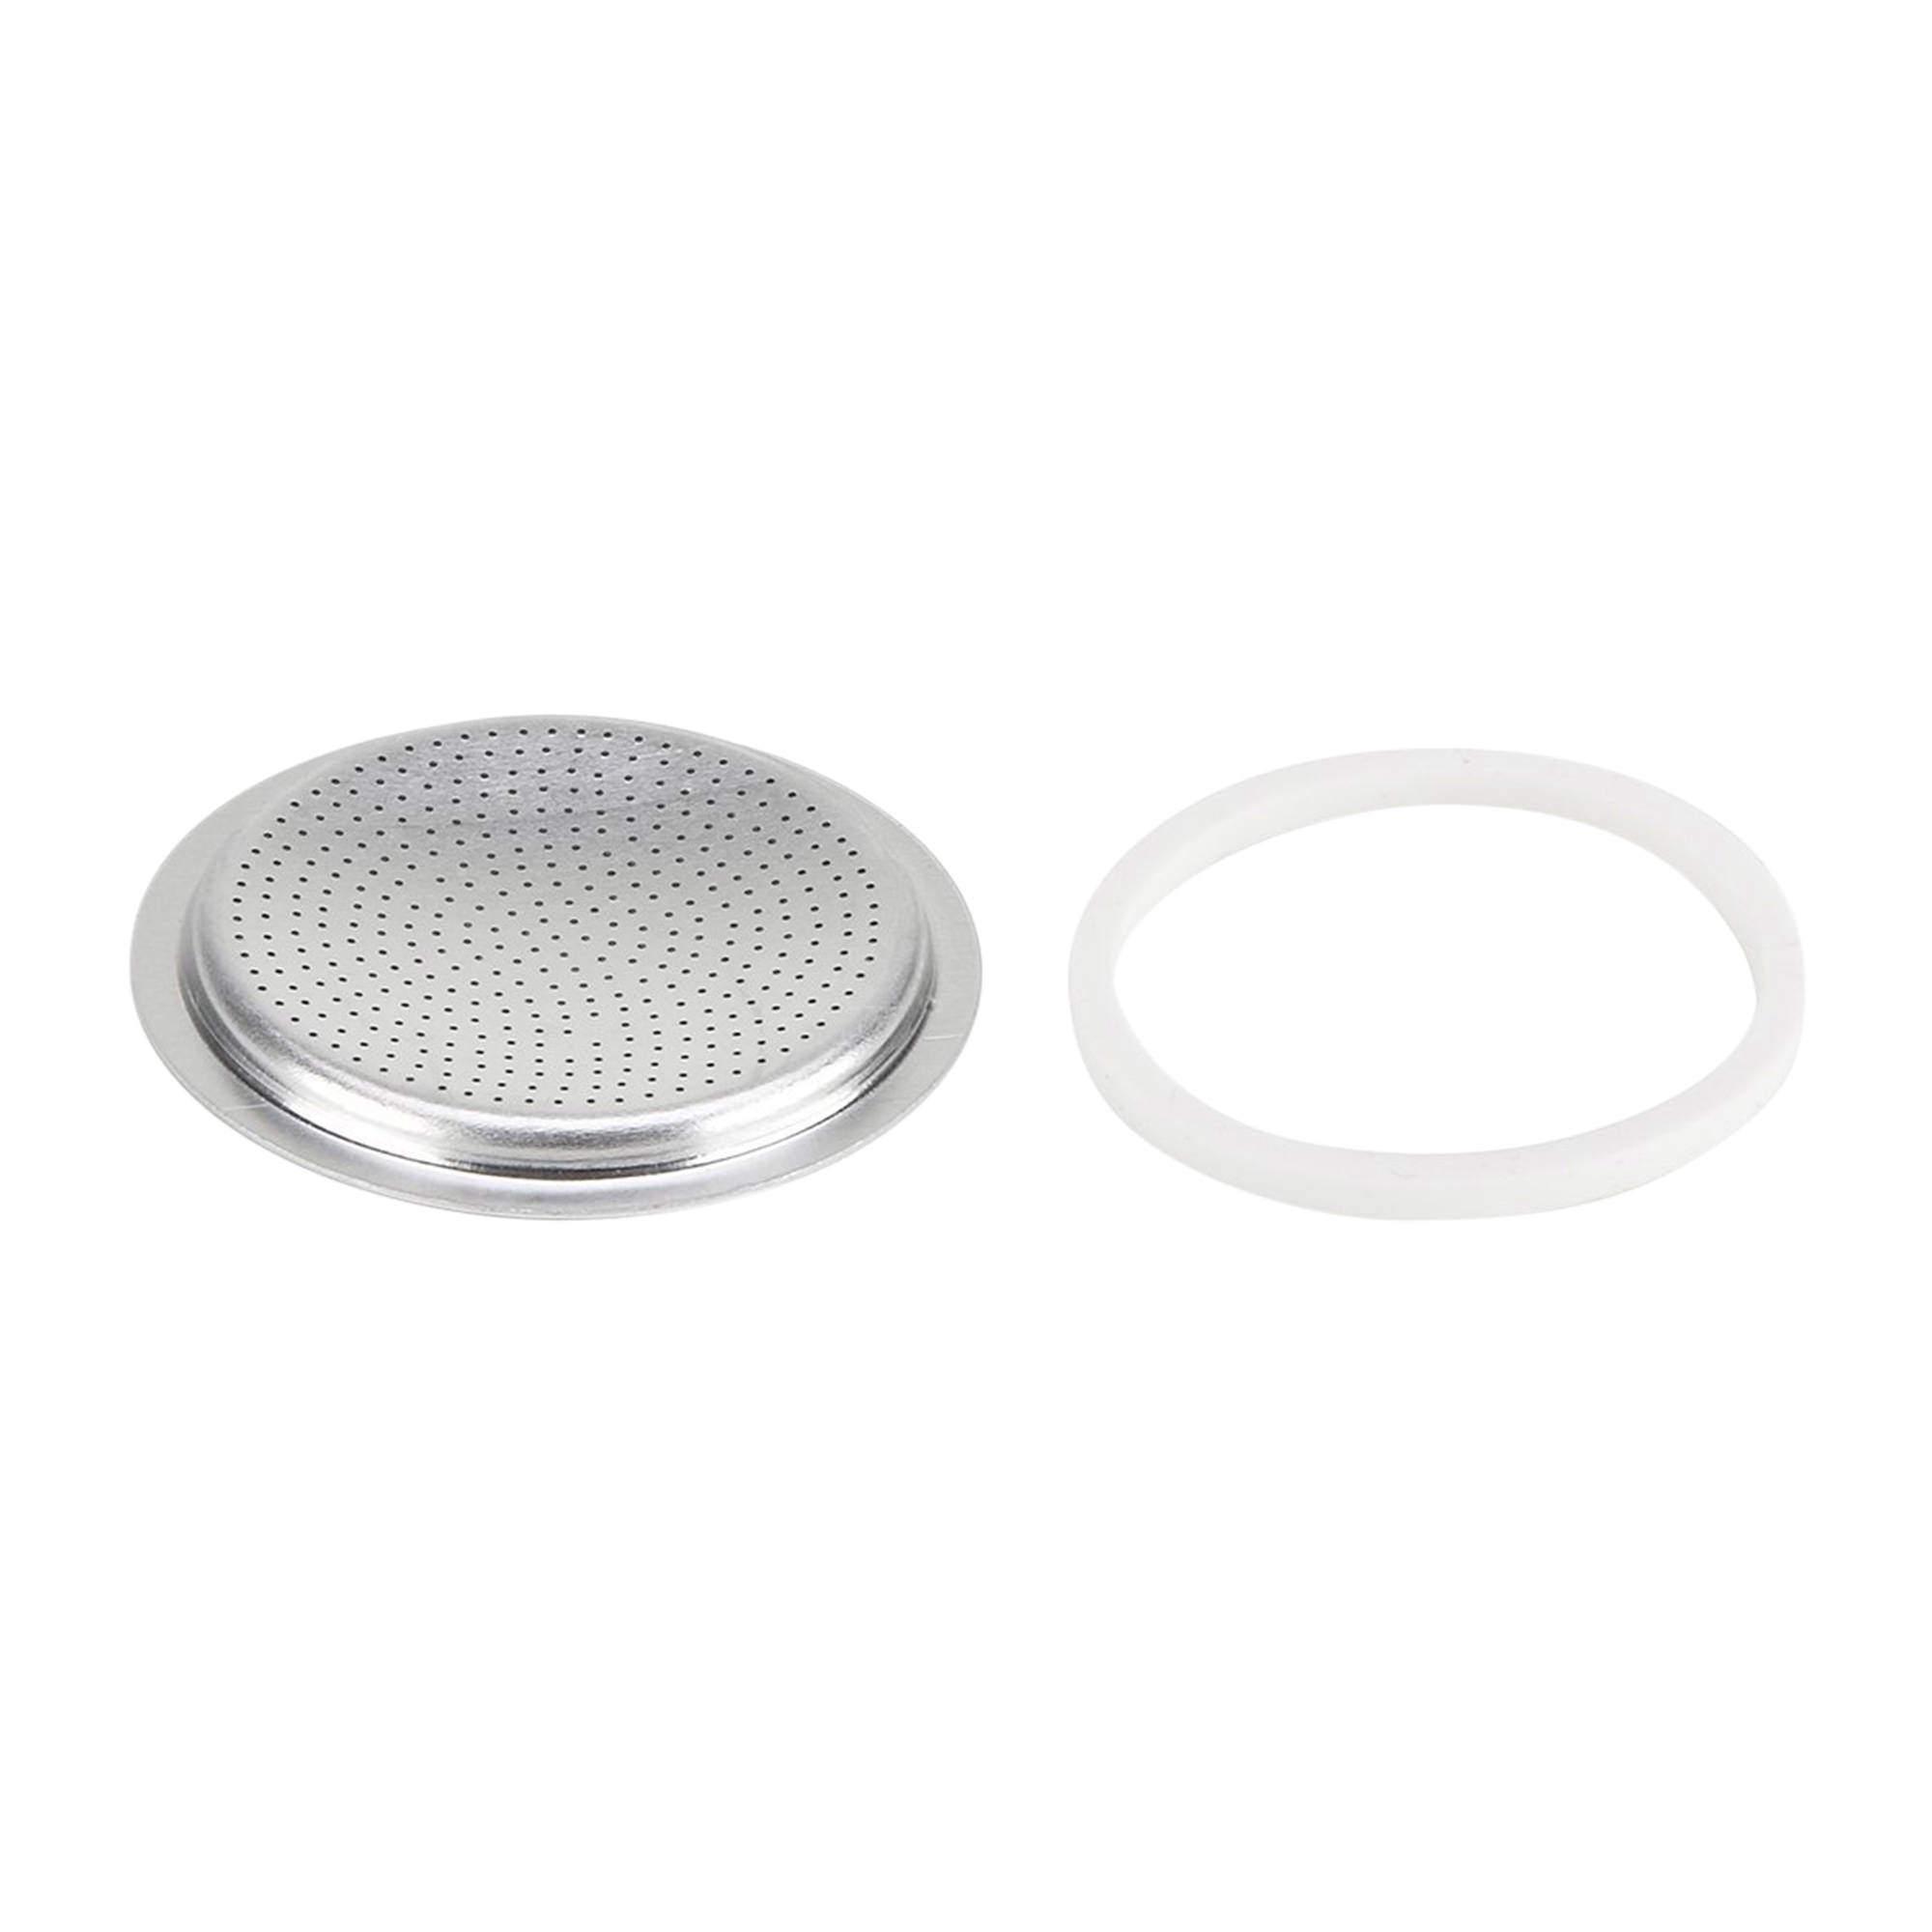 Bialetti Aluminium Gasket/Filter Plate 2 Cup Image 1